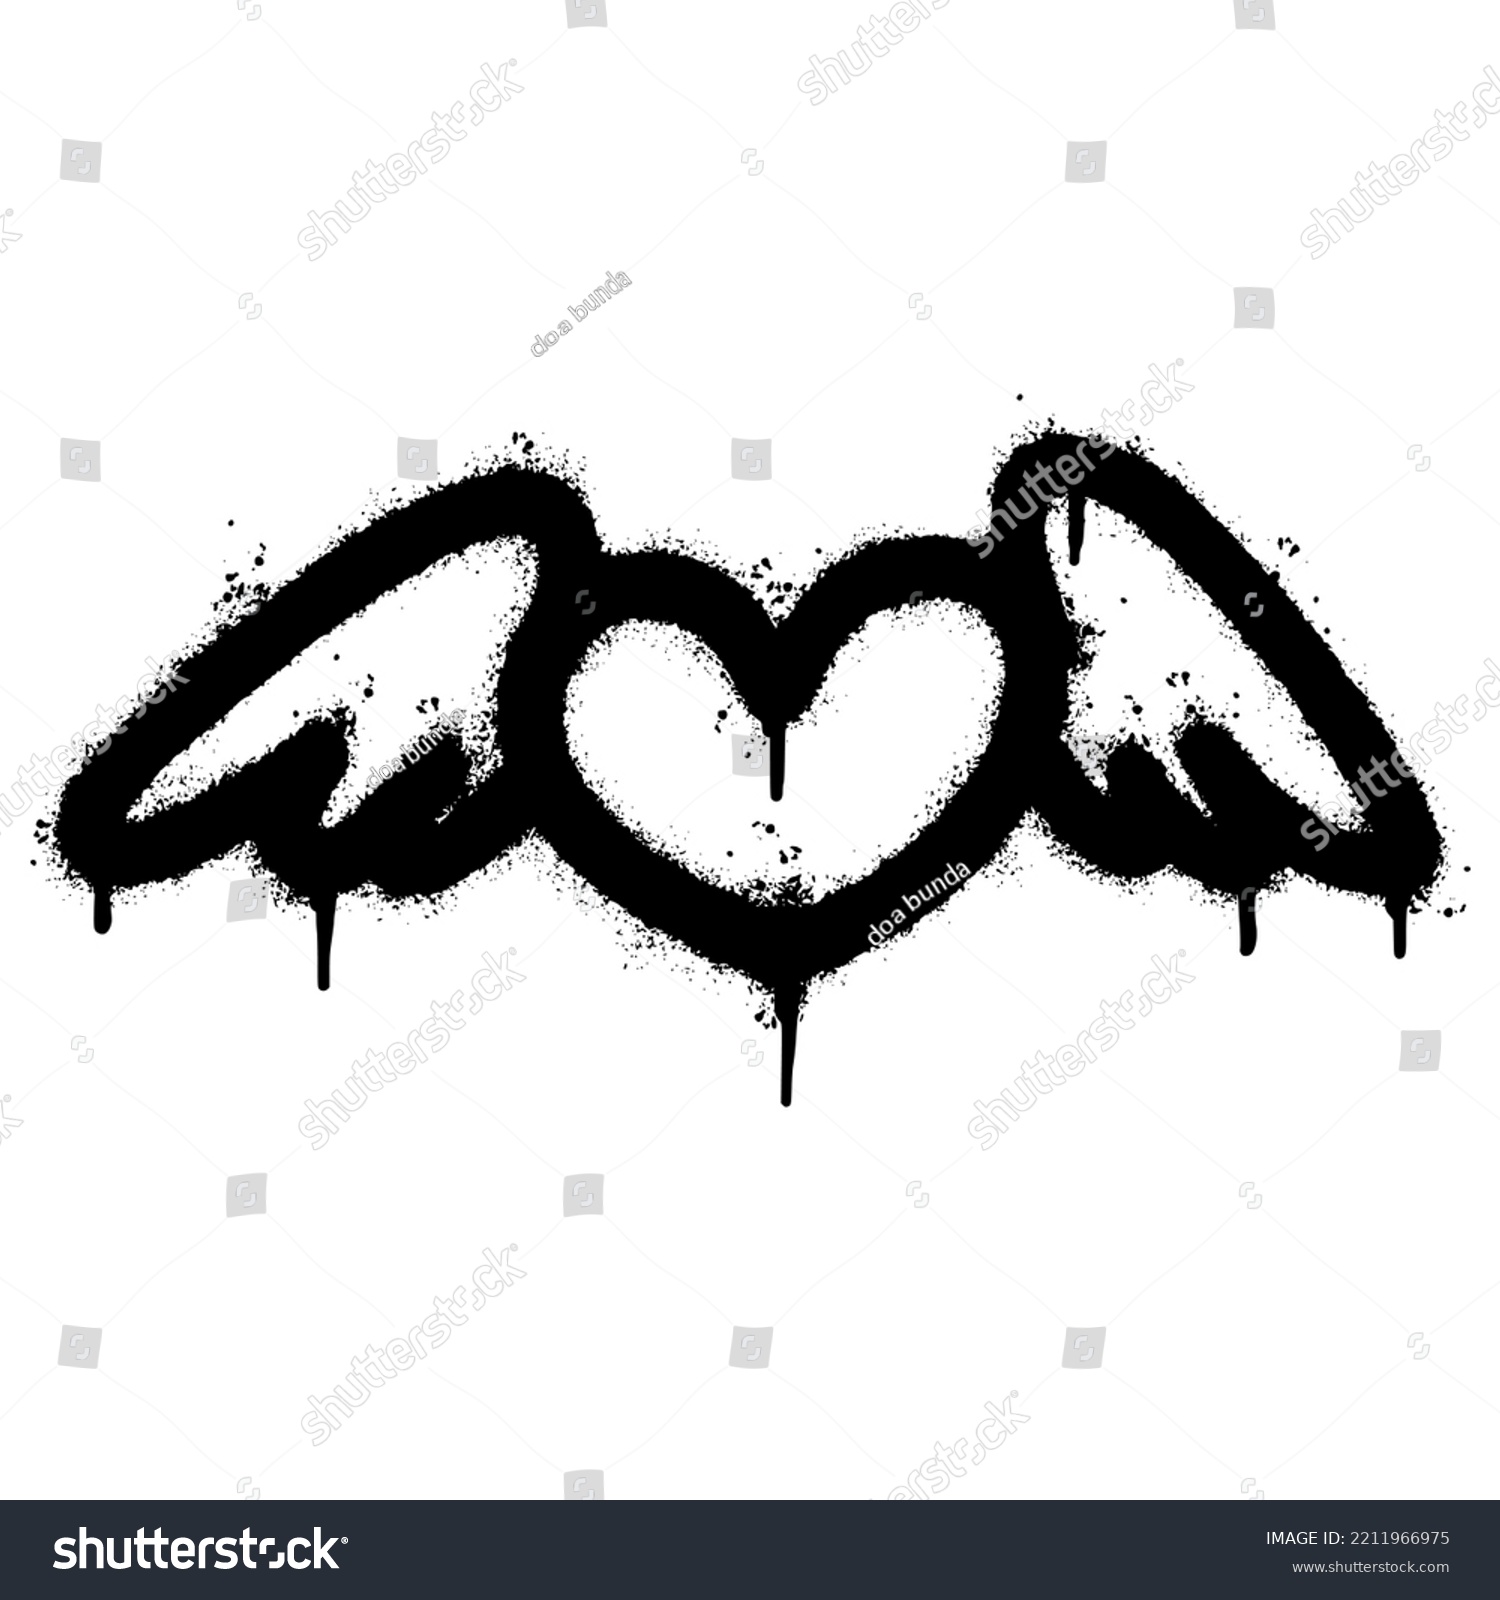 SVG of Spray Painted Graffiti heart wings icon Sprayed isolated with a white background. graffiti love wings  symbol with over spray in black over white. Vector illustration. svg